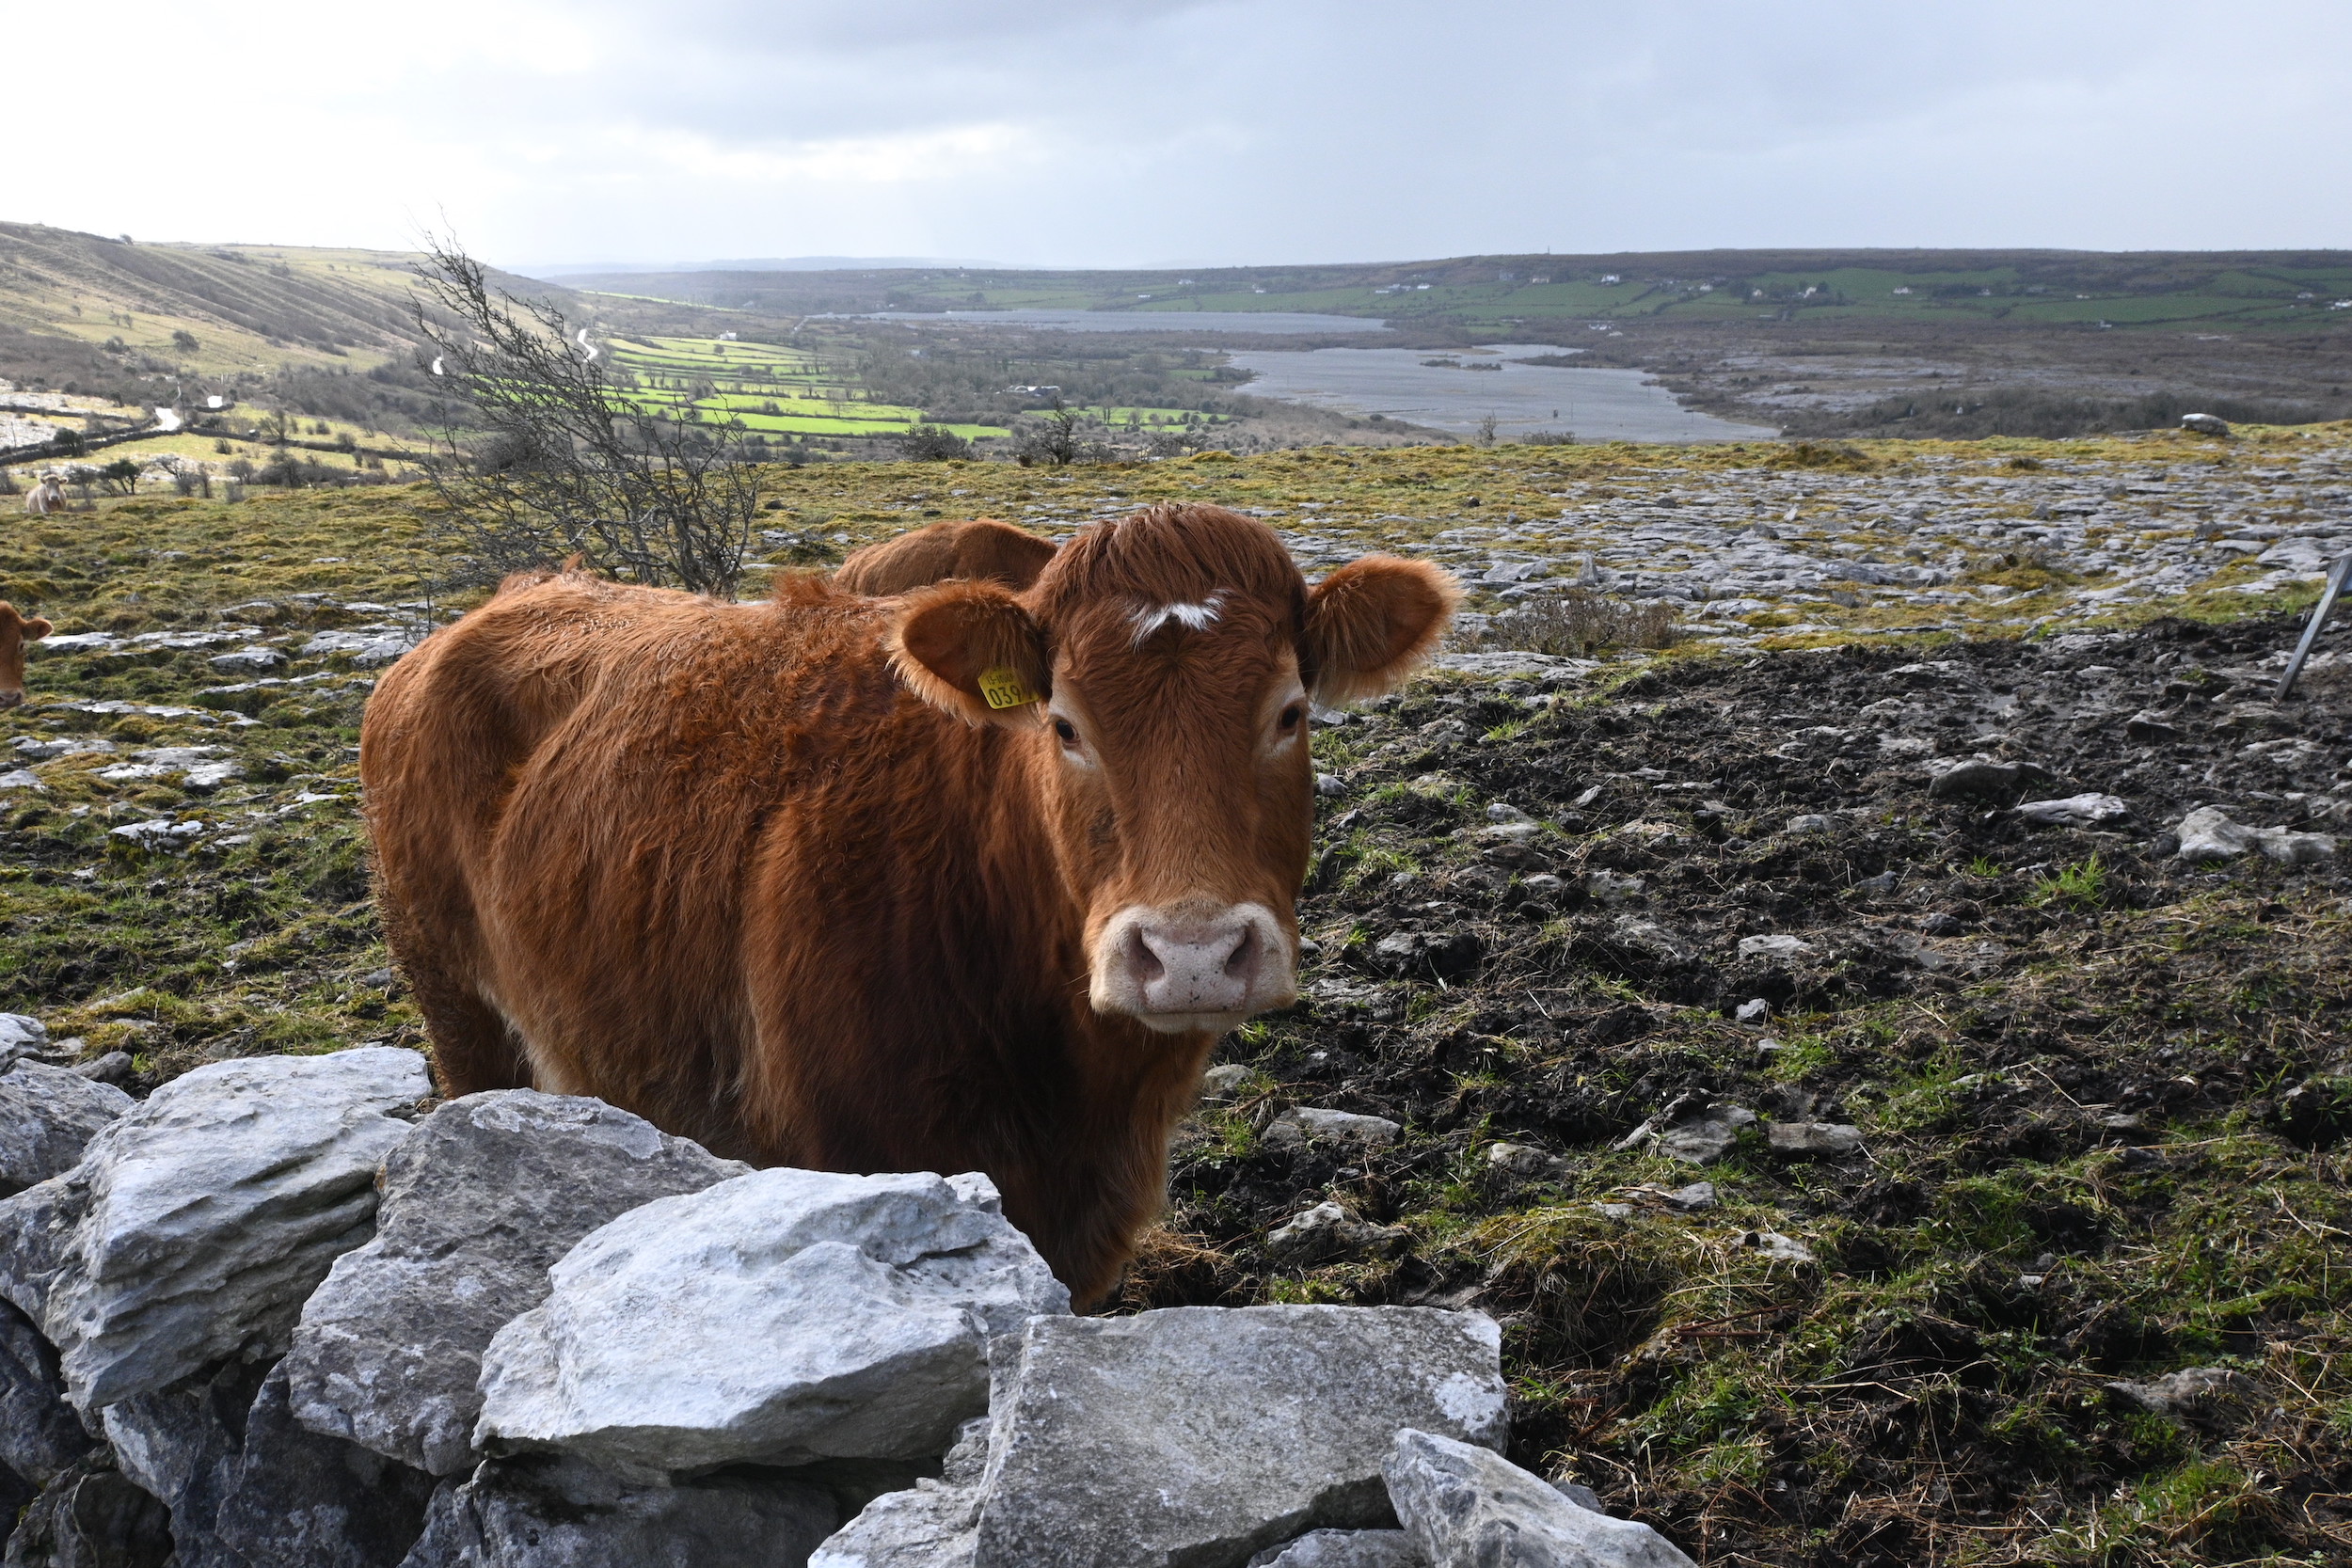 In recent decades, the Burren winterage system in Ireland was threatened by misguided food production policy. Local farmers and ecologists helped save it, presenting the national and European governments with evidence of the system’s environmental merit.